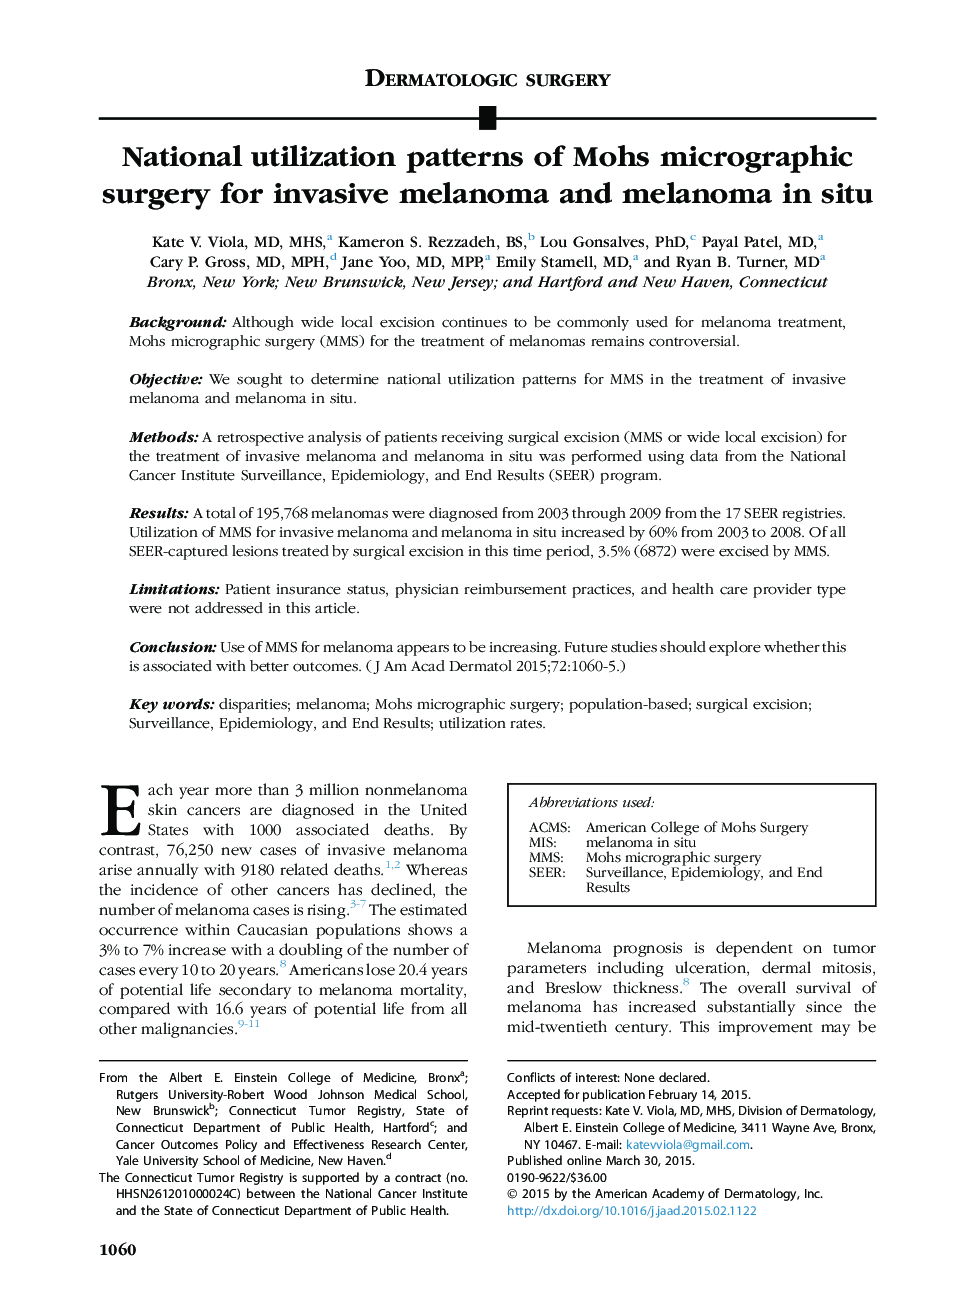 National utilization patterns of Mohs micrographic surgery for invasive melanoma and melanoma in situ 